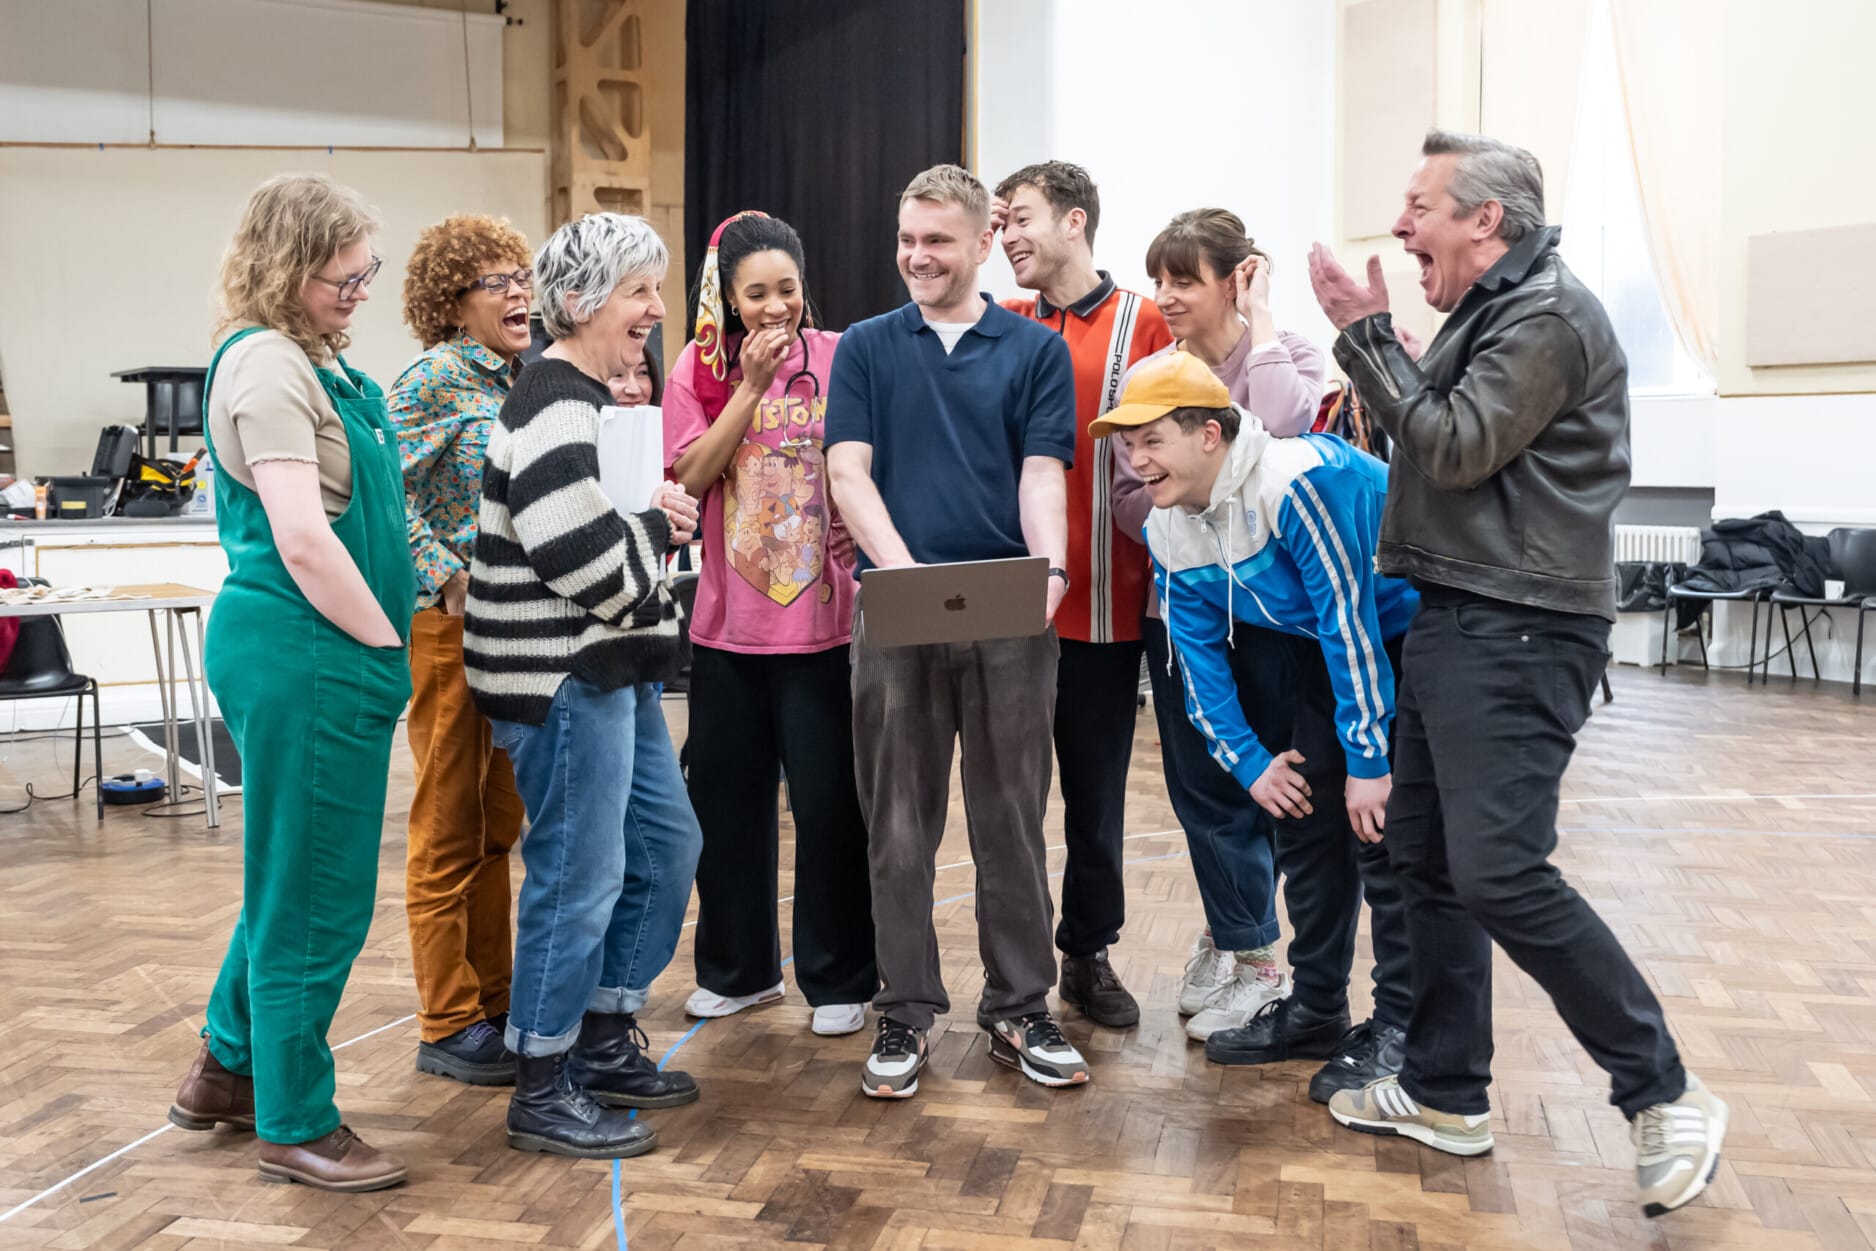 Cast and creatives in rehearsal for Punch. Photo by Marc Brenner